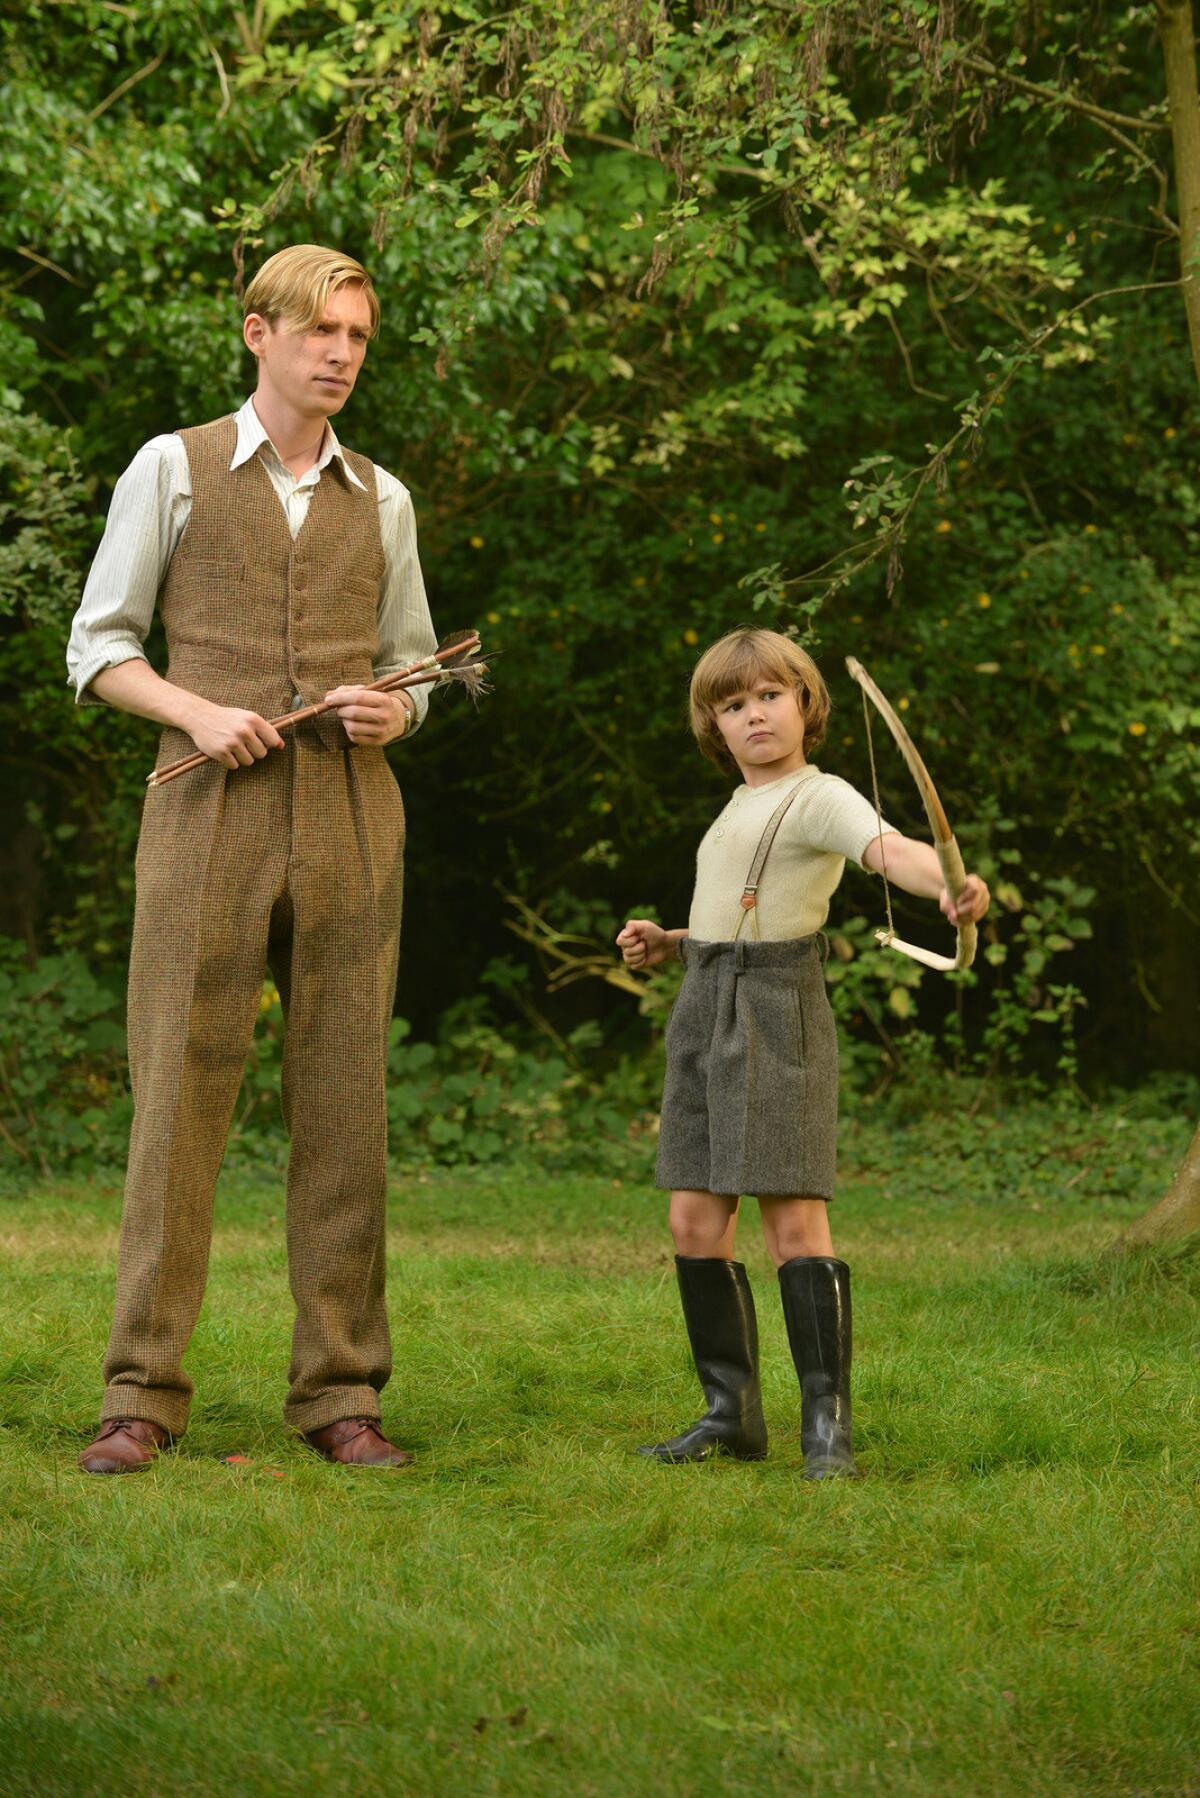 Domhnall Gleeson, left, and Will Tilston in "Goodbye Christopher Robin." ( David Appleby / Fox Searchlight Pictures)